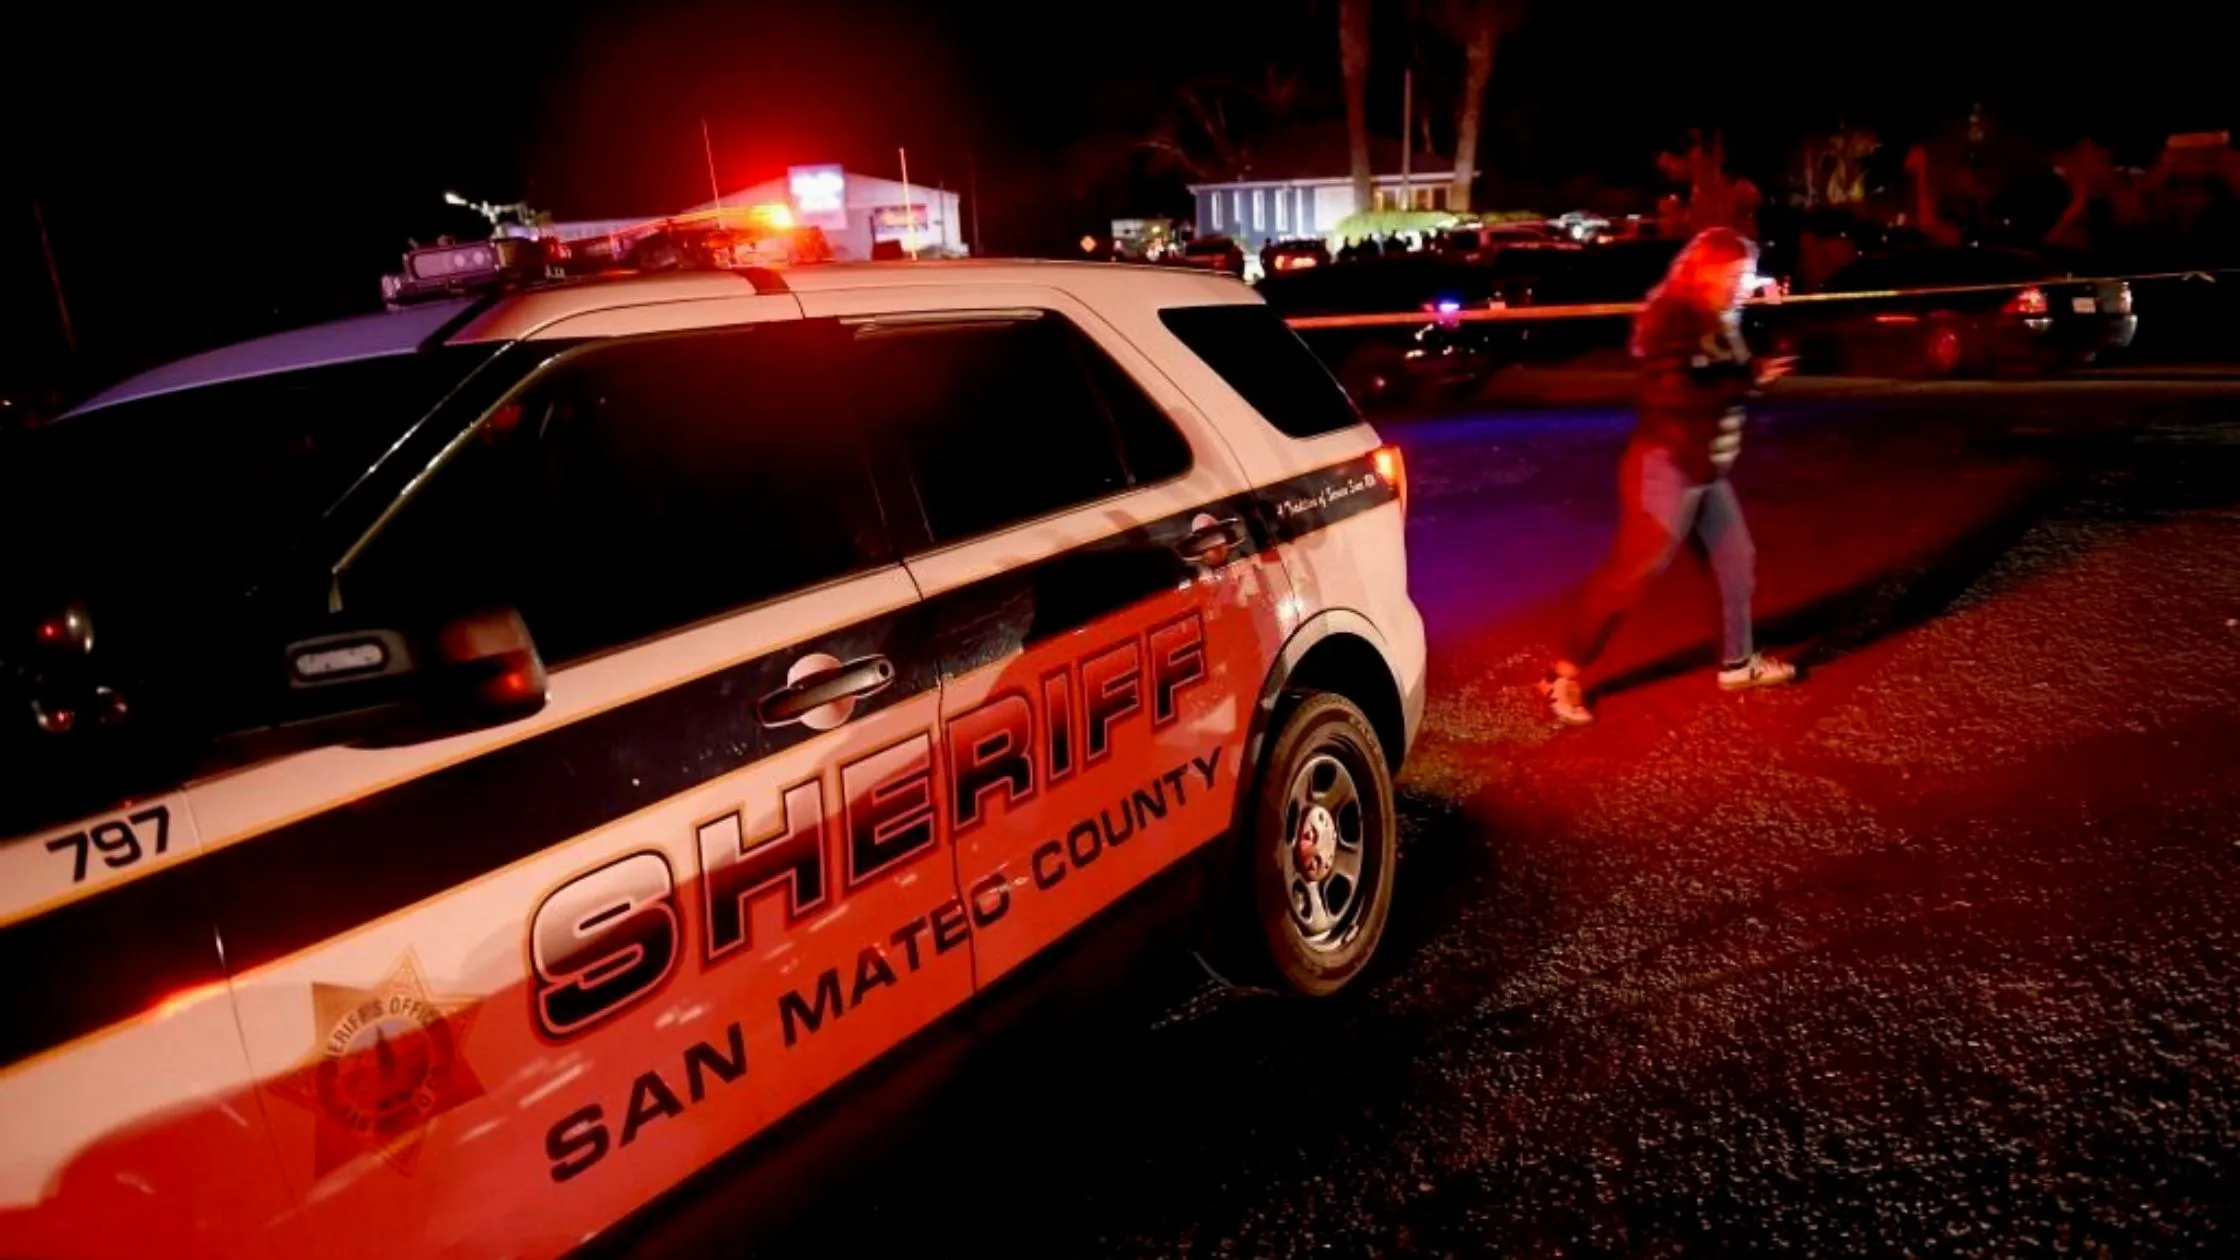 Half Moon Bay Mass Shooting The Second Massacre Within The Week  